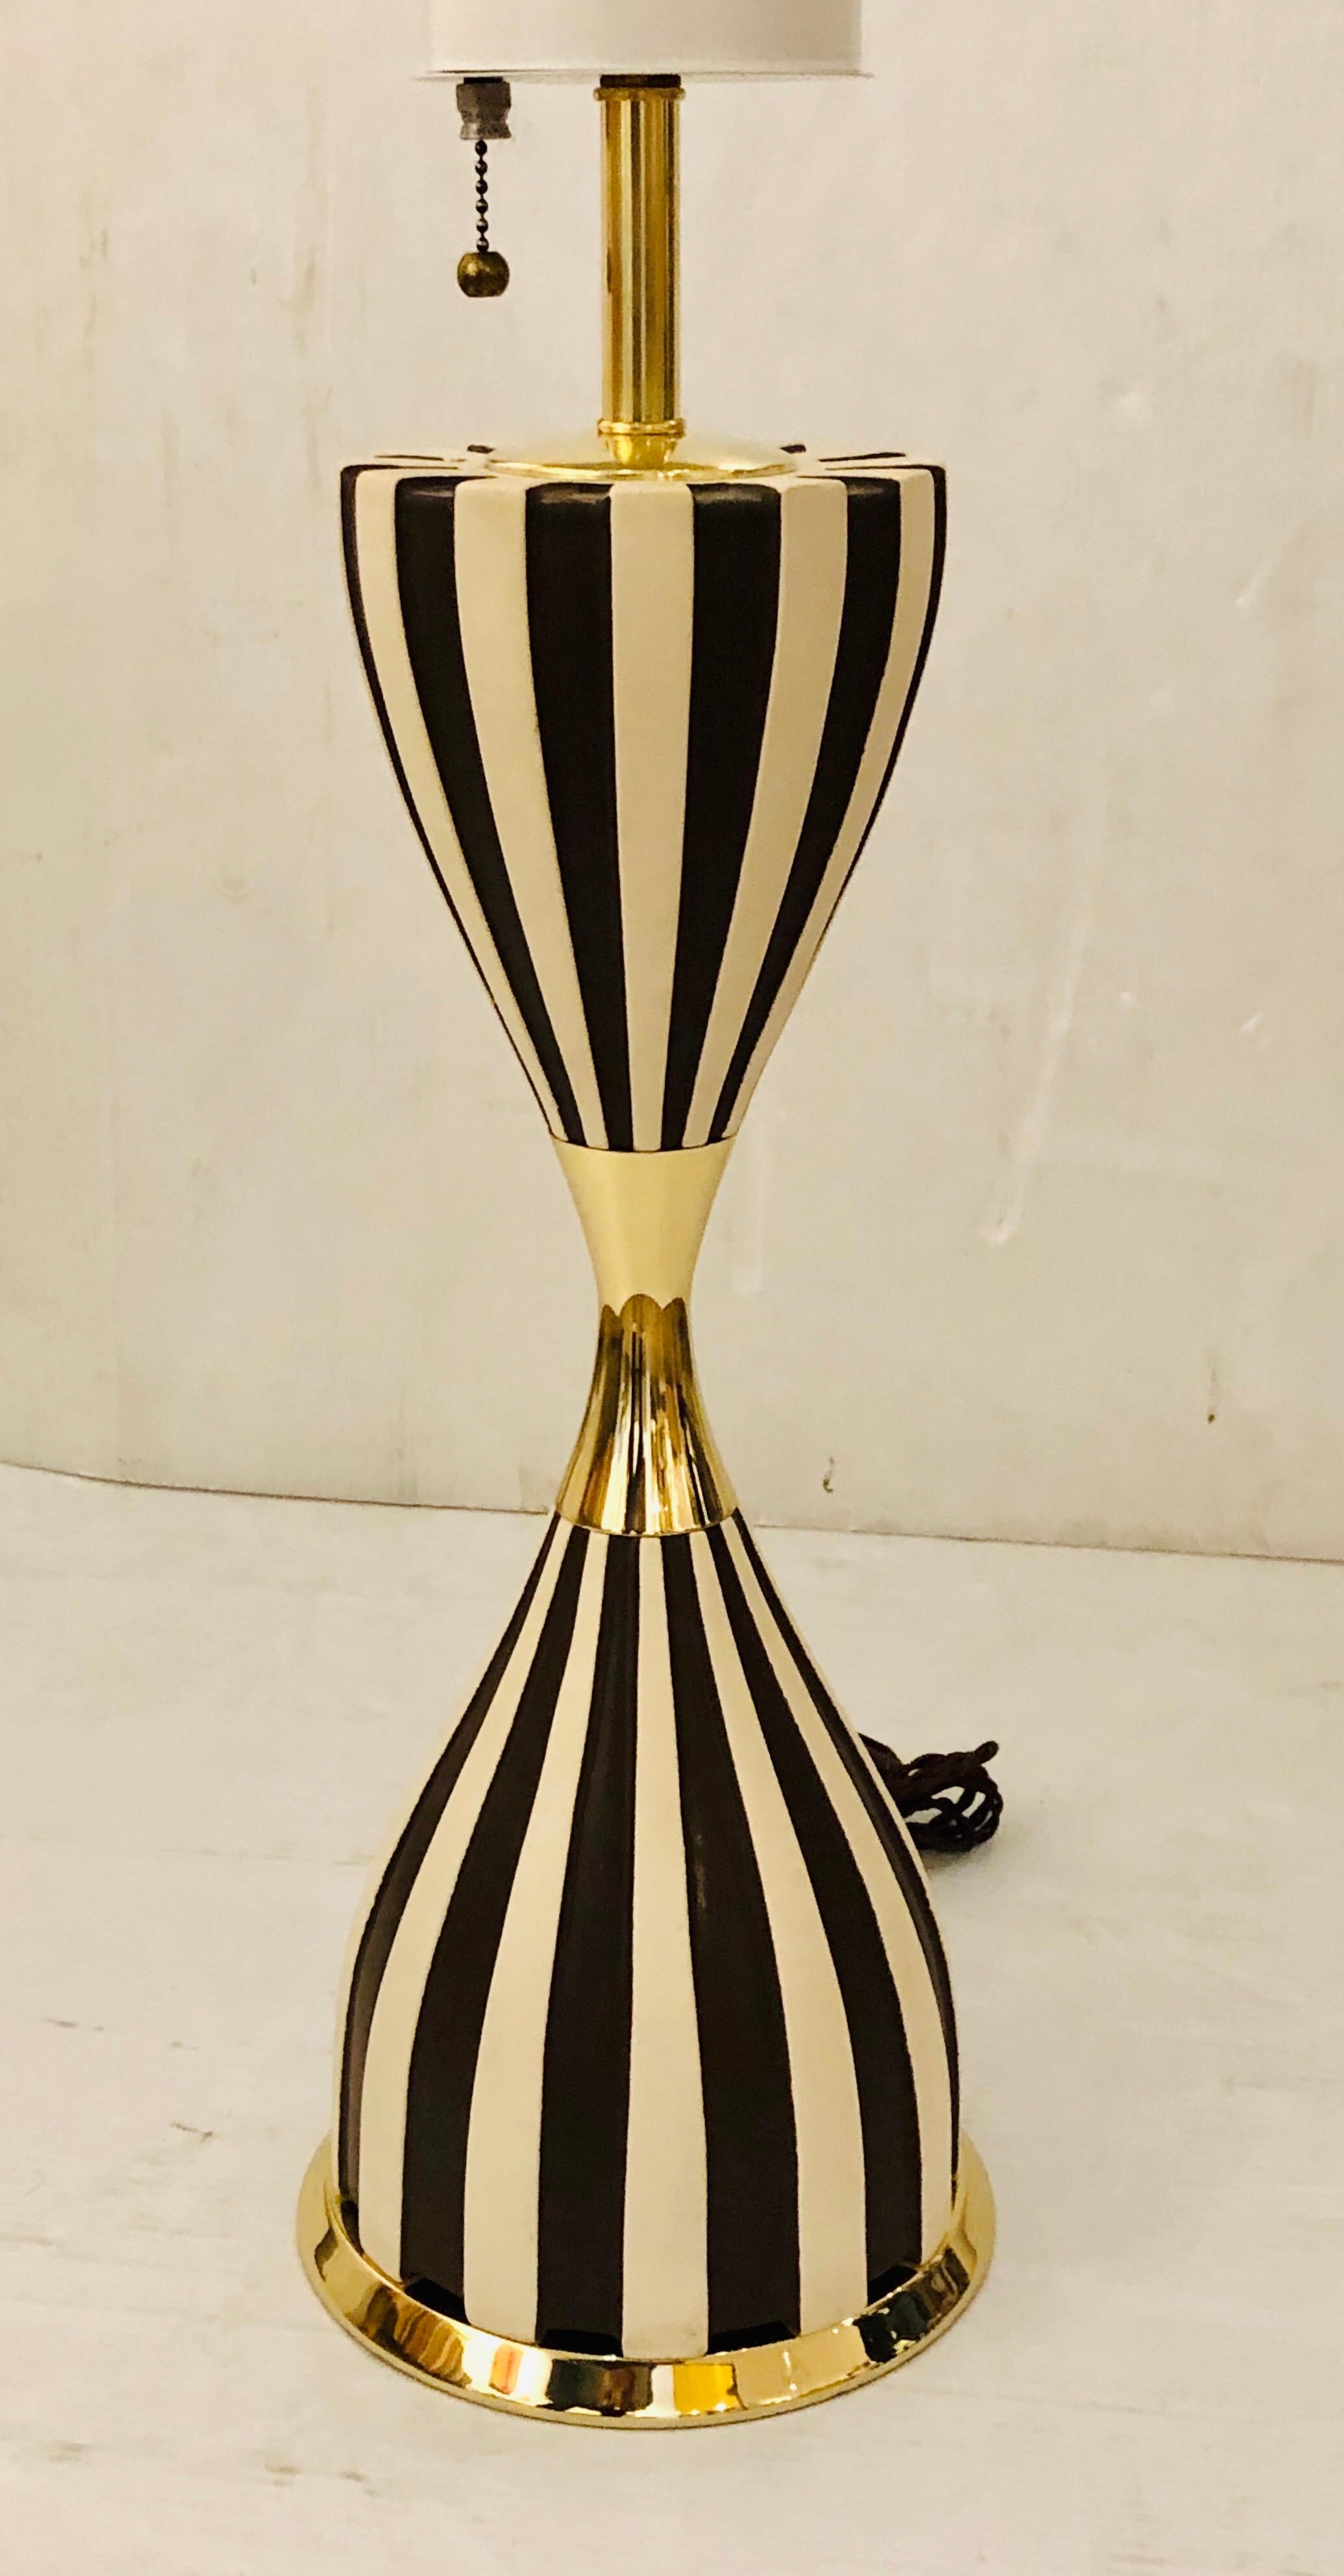 20th Century 1950s American Mid-Century Modern Harlequin Table Lamp by Lightolier